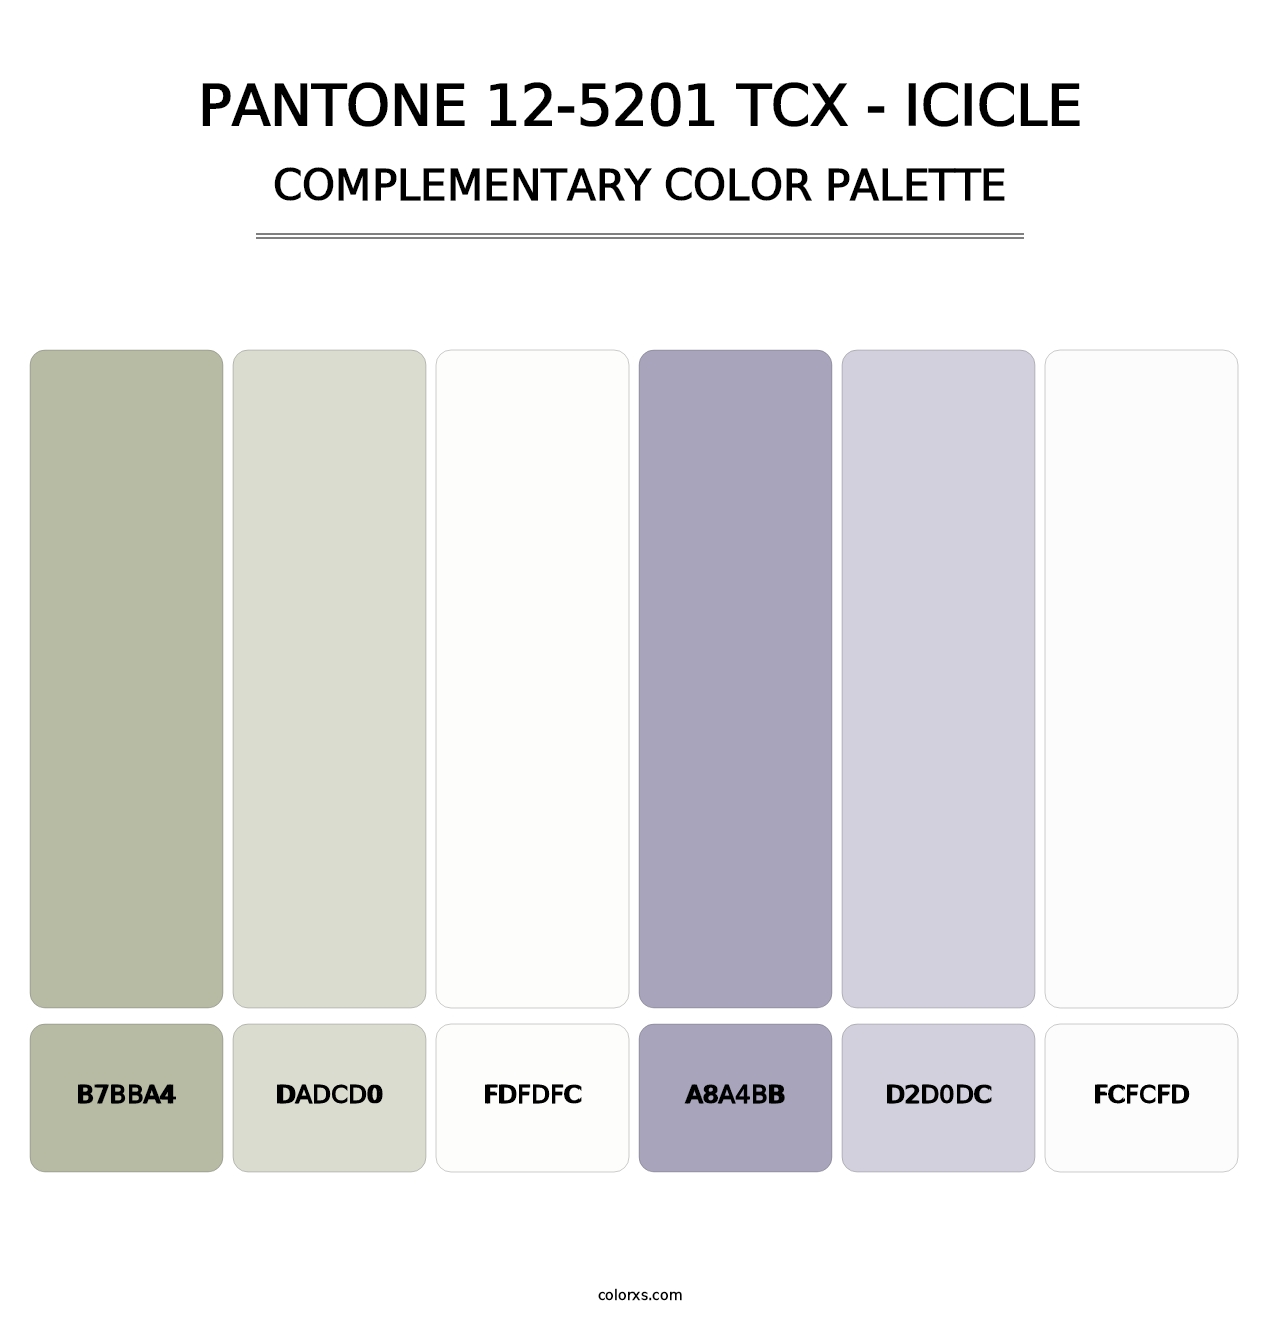 PANTONE 12-5201 TCX - Icicle - Complementary Color Palette